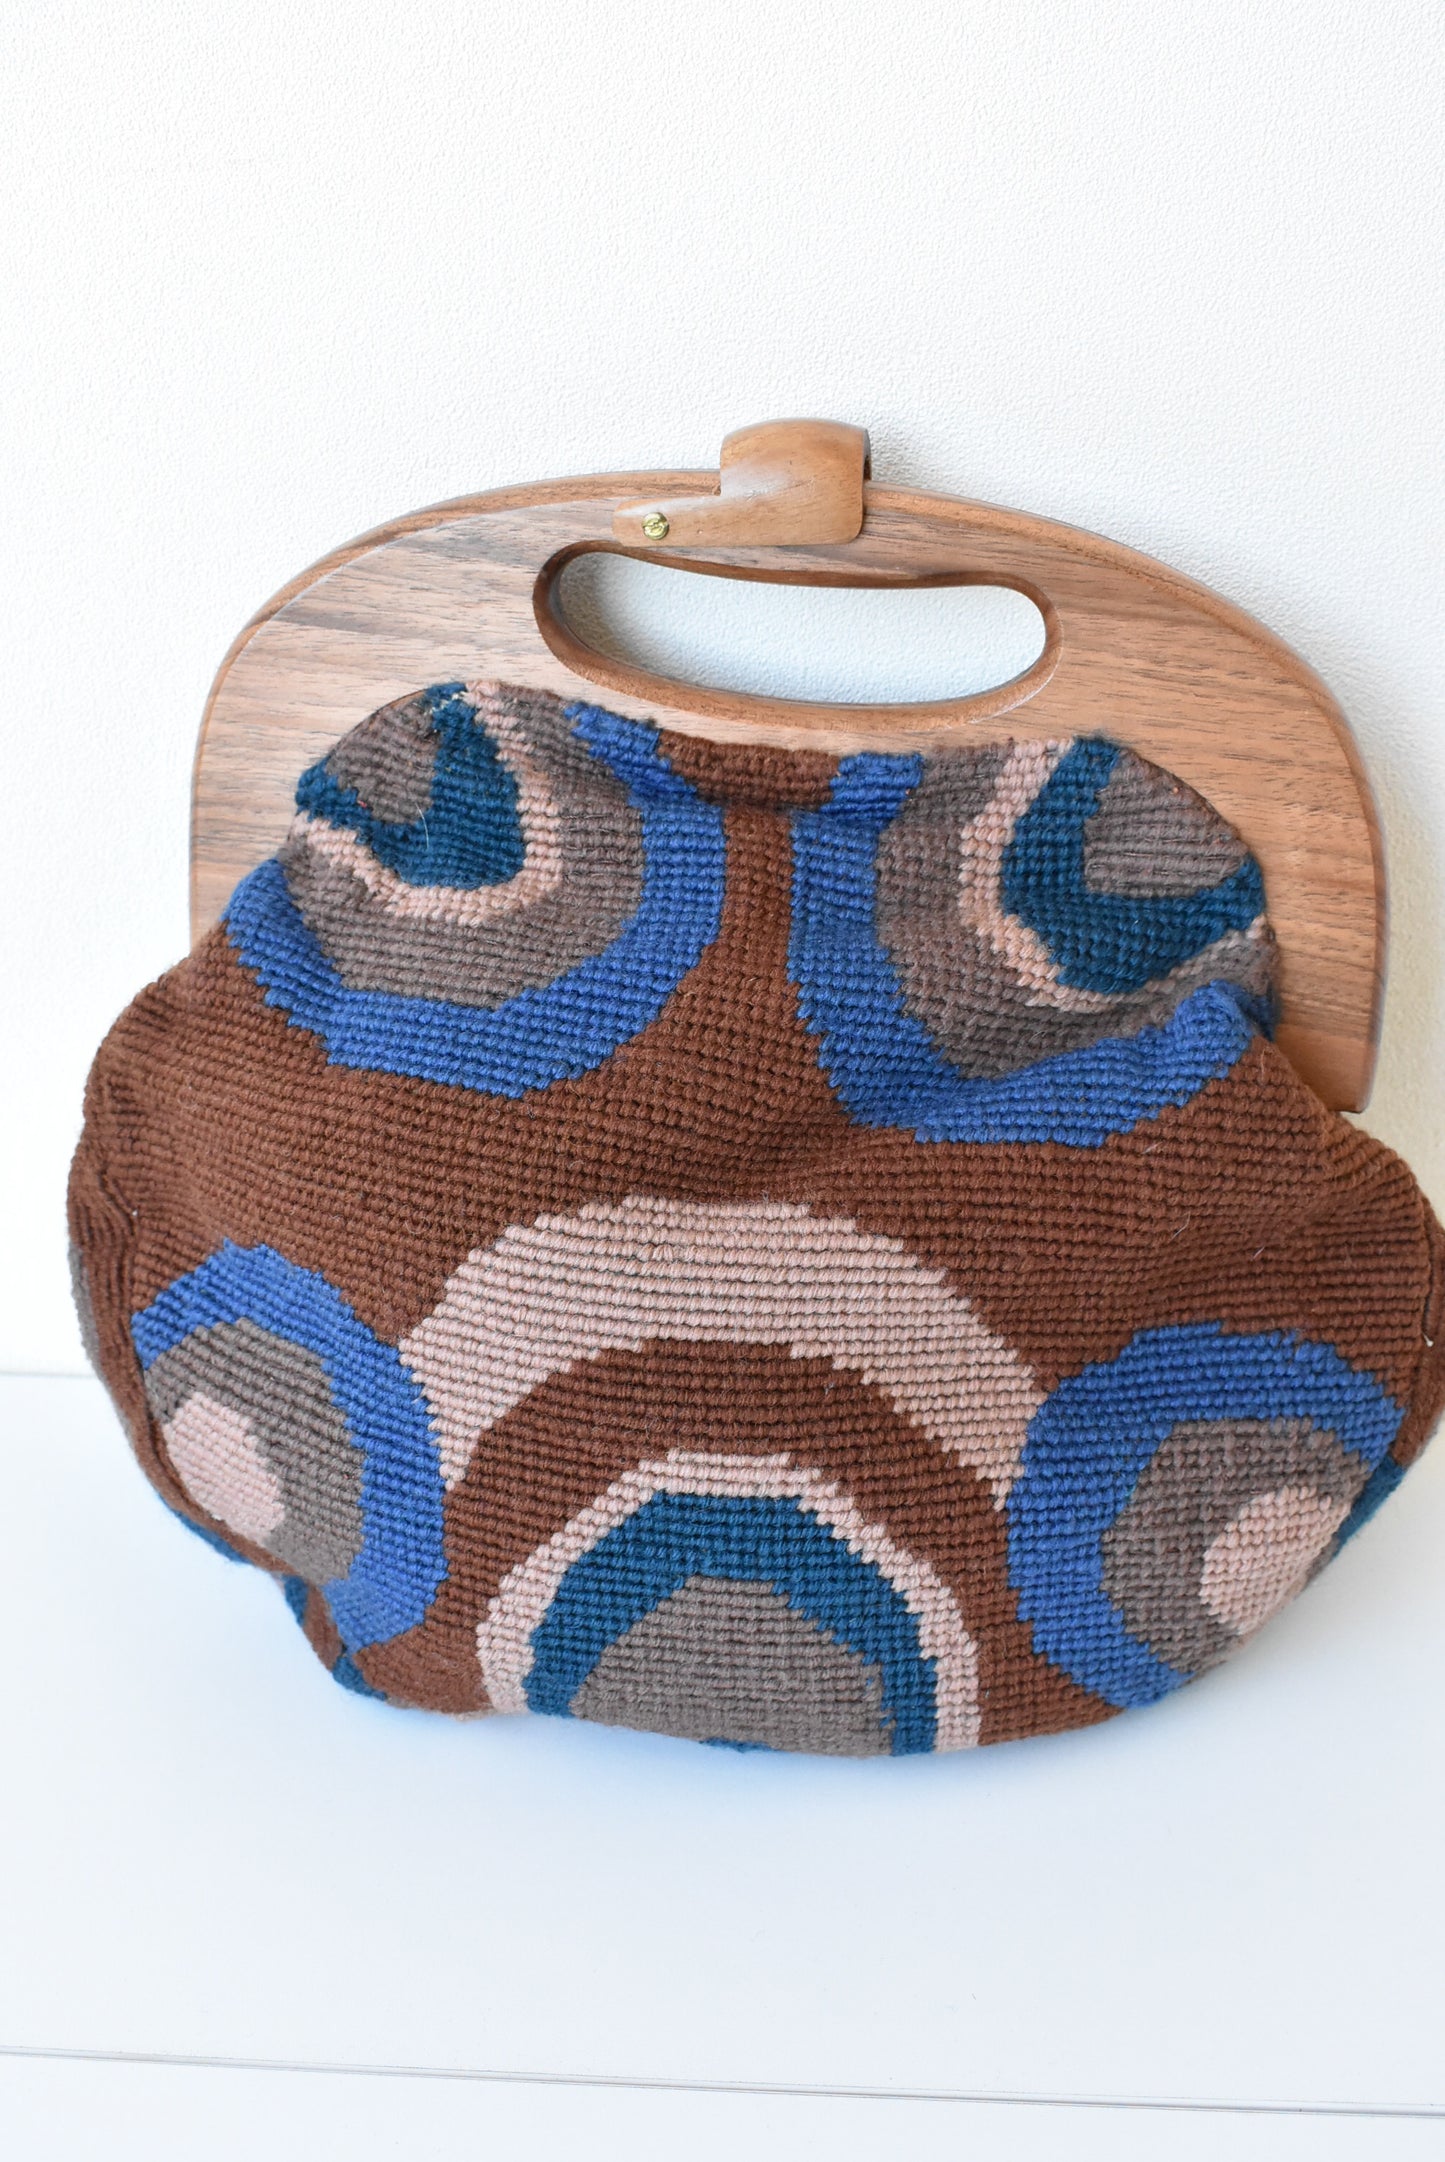 Vintage 1970s tapestry bag with wooden handles